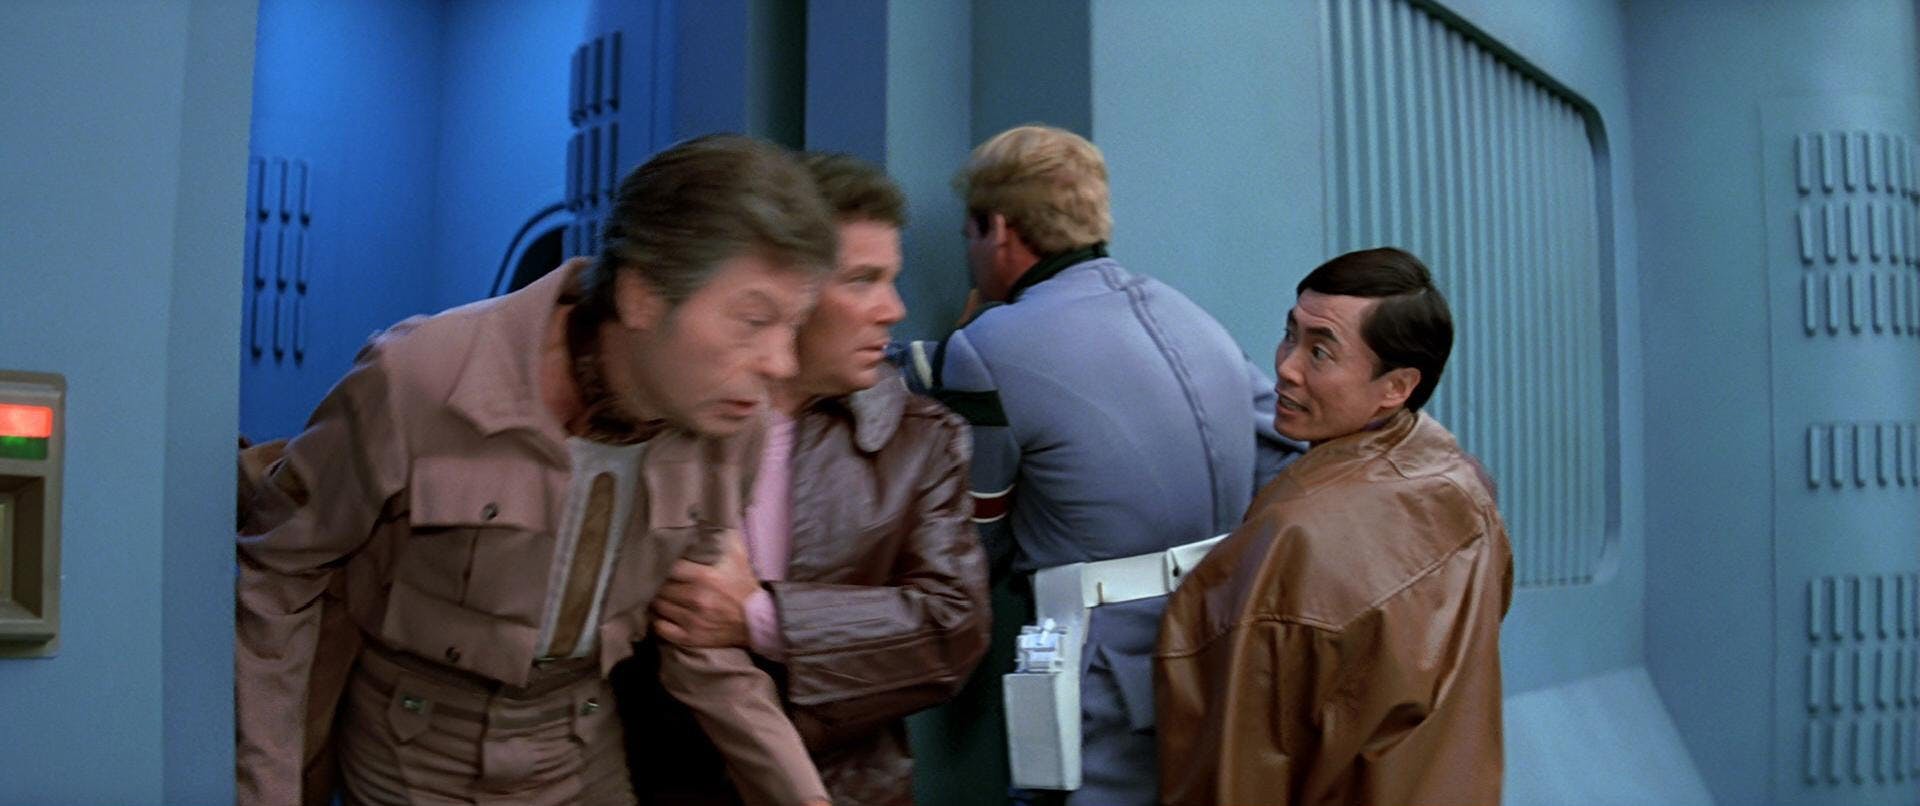 Sulu holds a guard in place as Kirk rescues McCoy from his holding cell in The Search for Spock